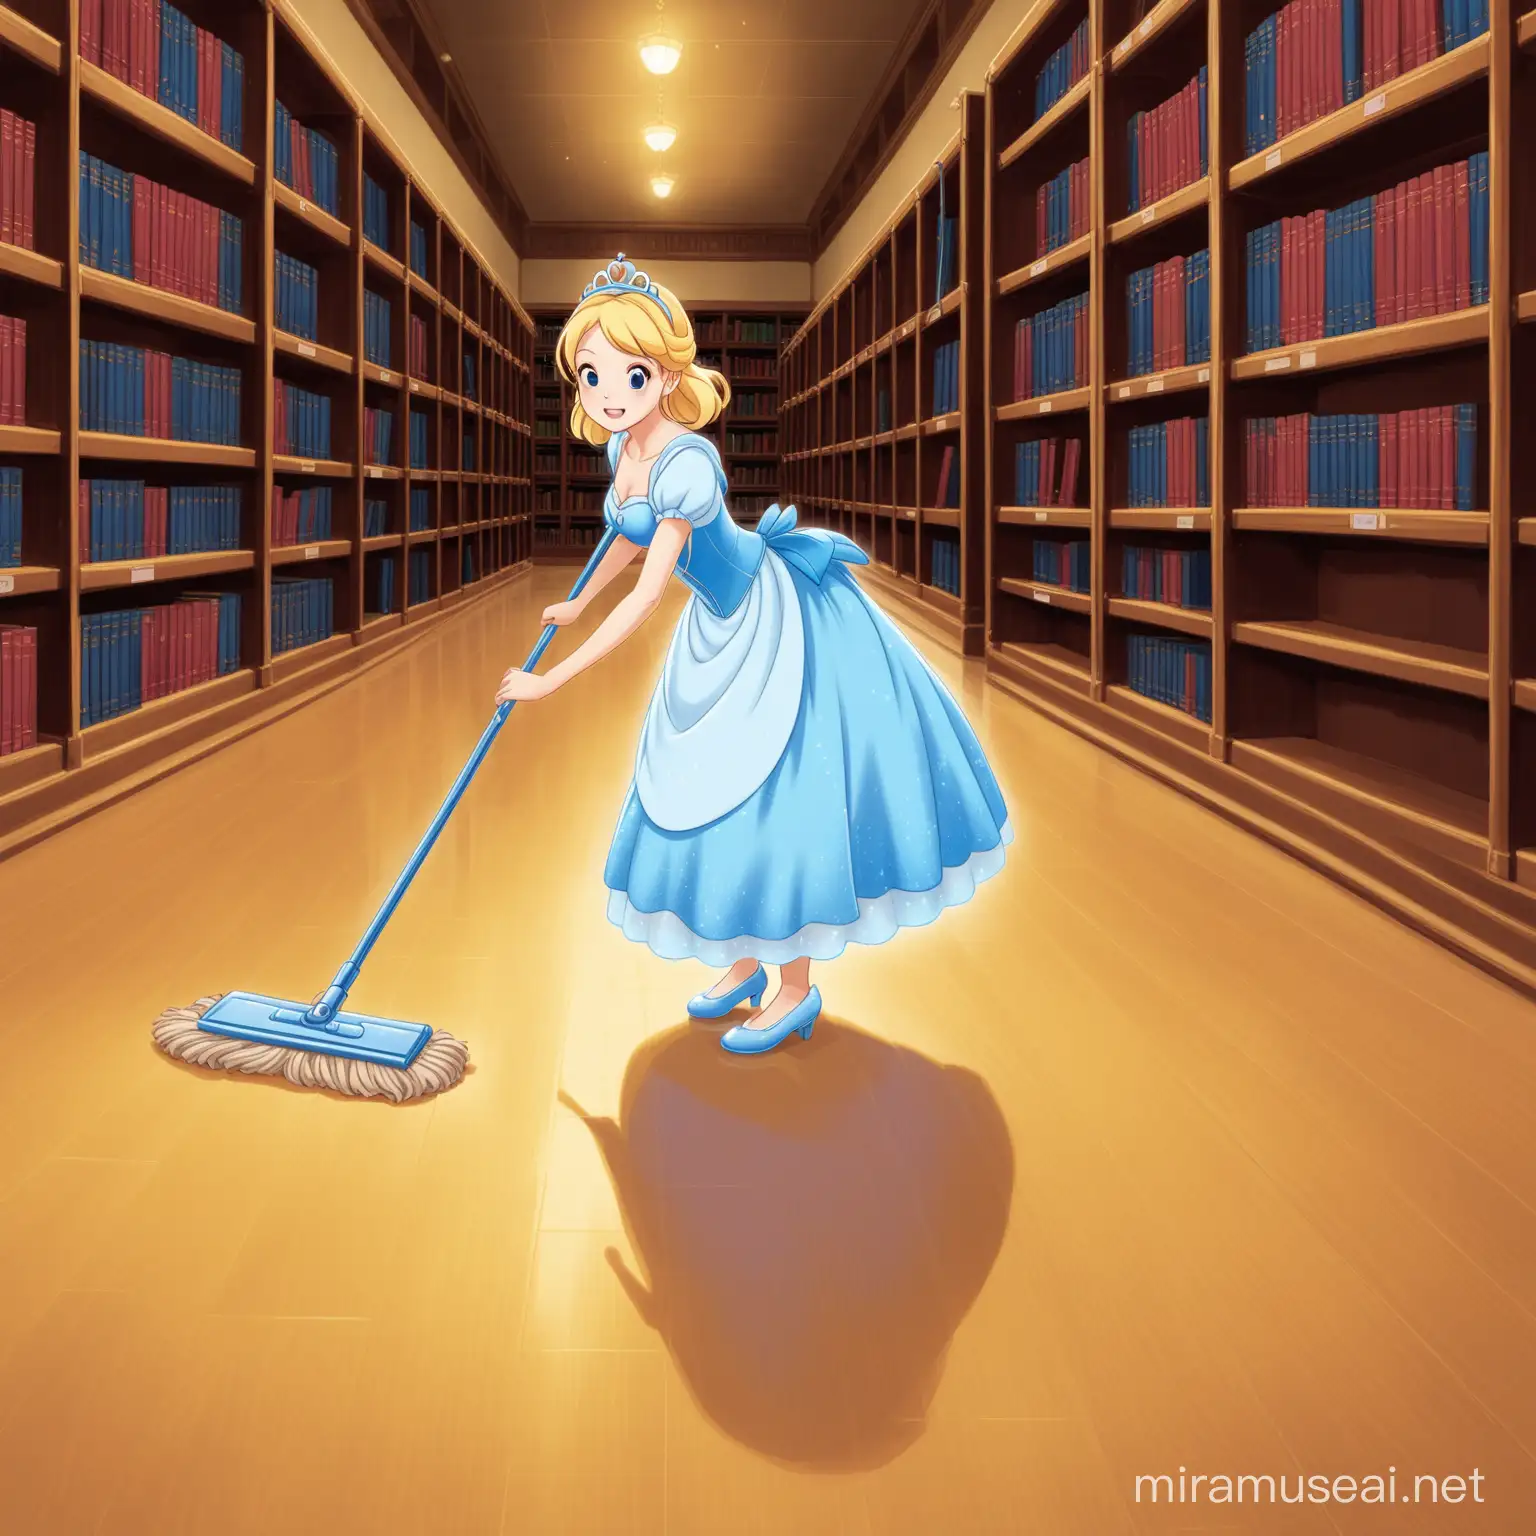 Cinderella Cleaning the Library Floors with a Broom